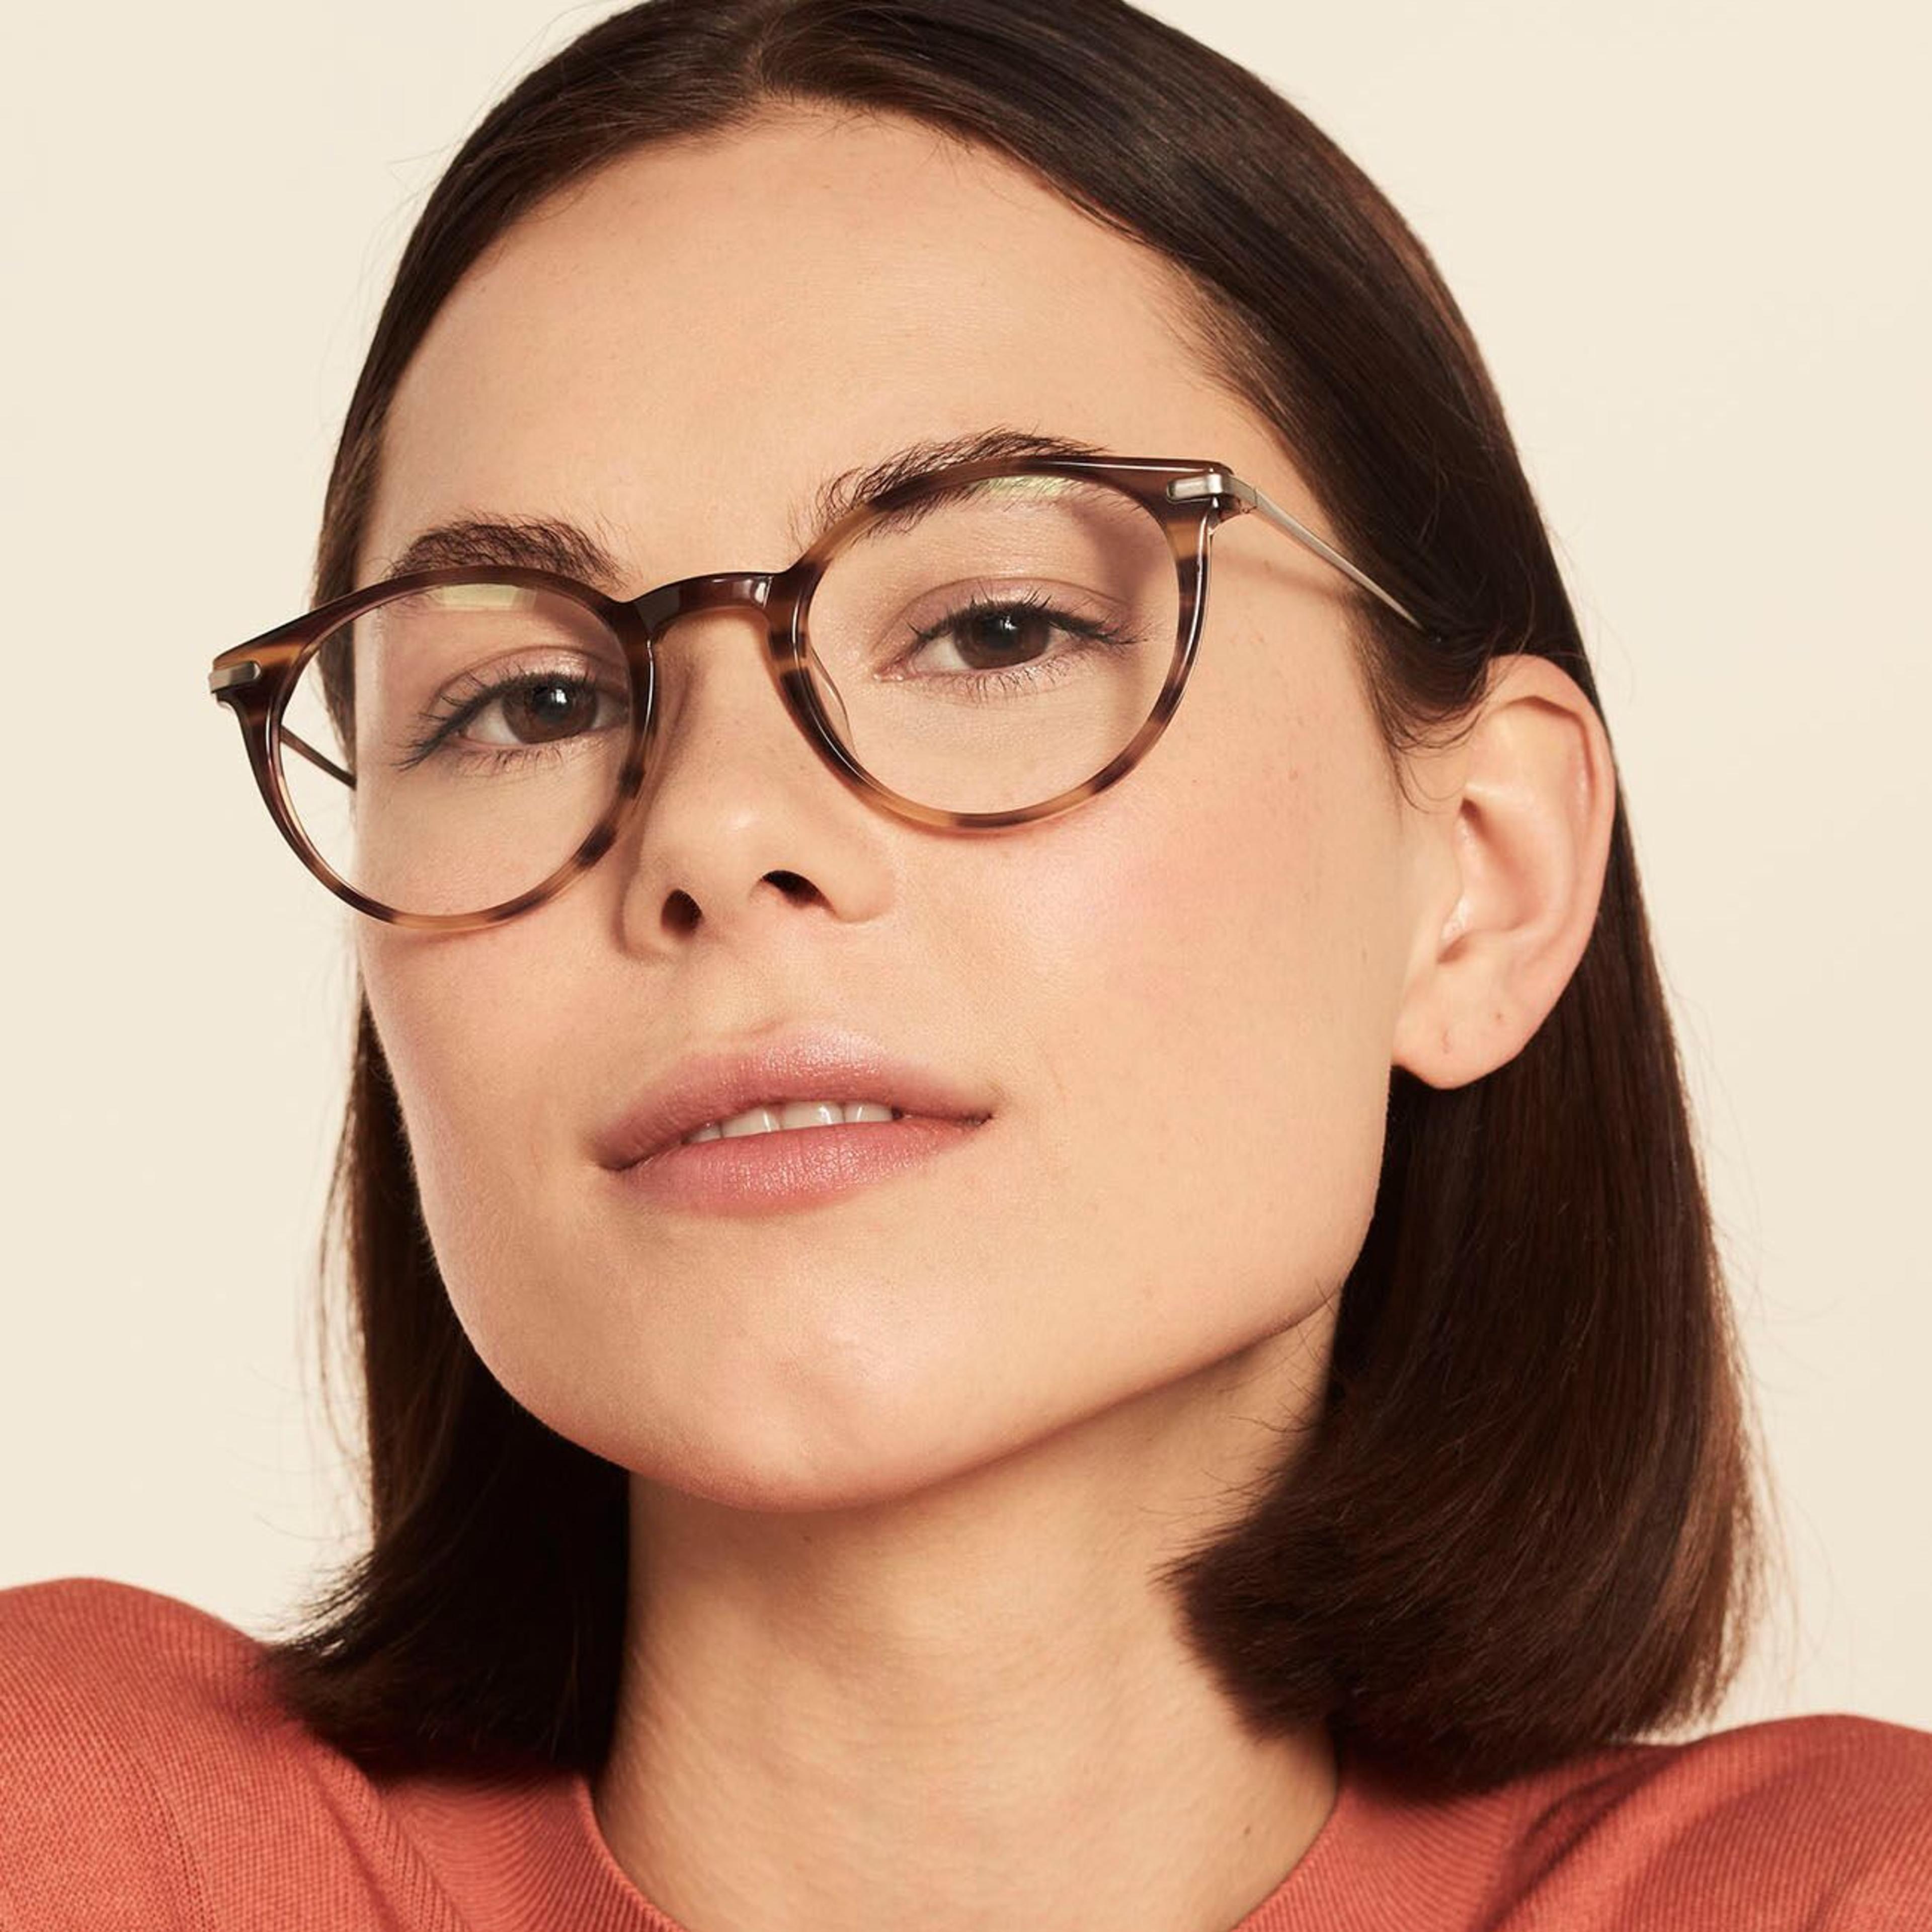 Ace & Tate Glasses | Round Acetate in Beige, Brown